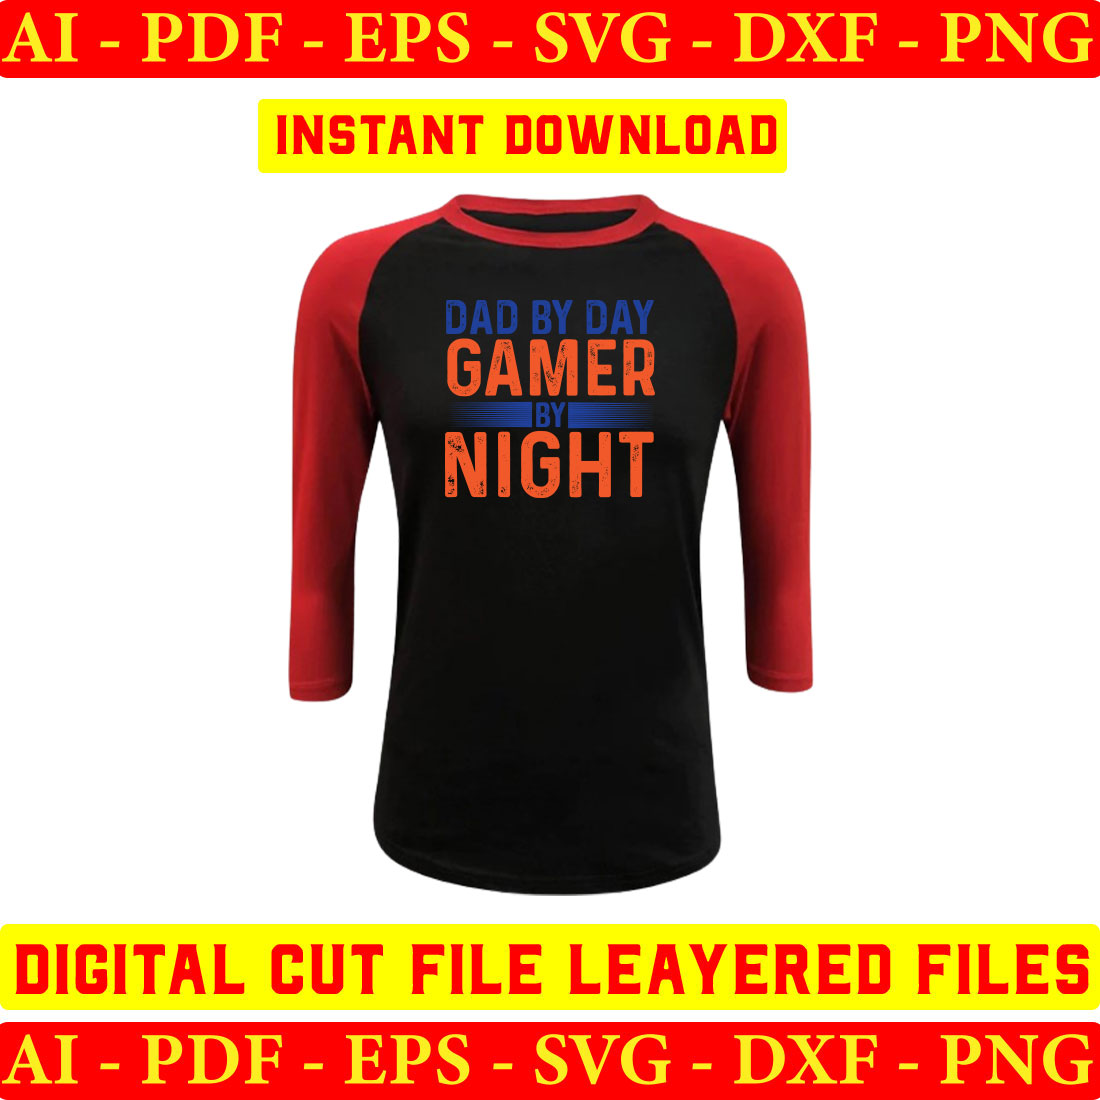 Black and red baseball shirt with the words dad by day gamer night on it.